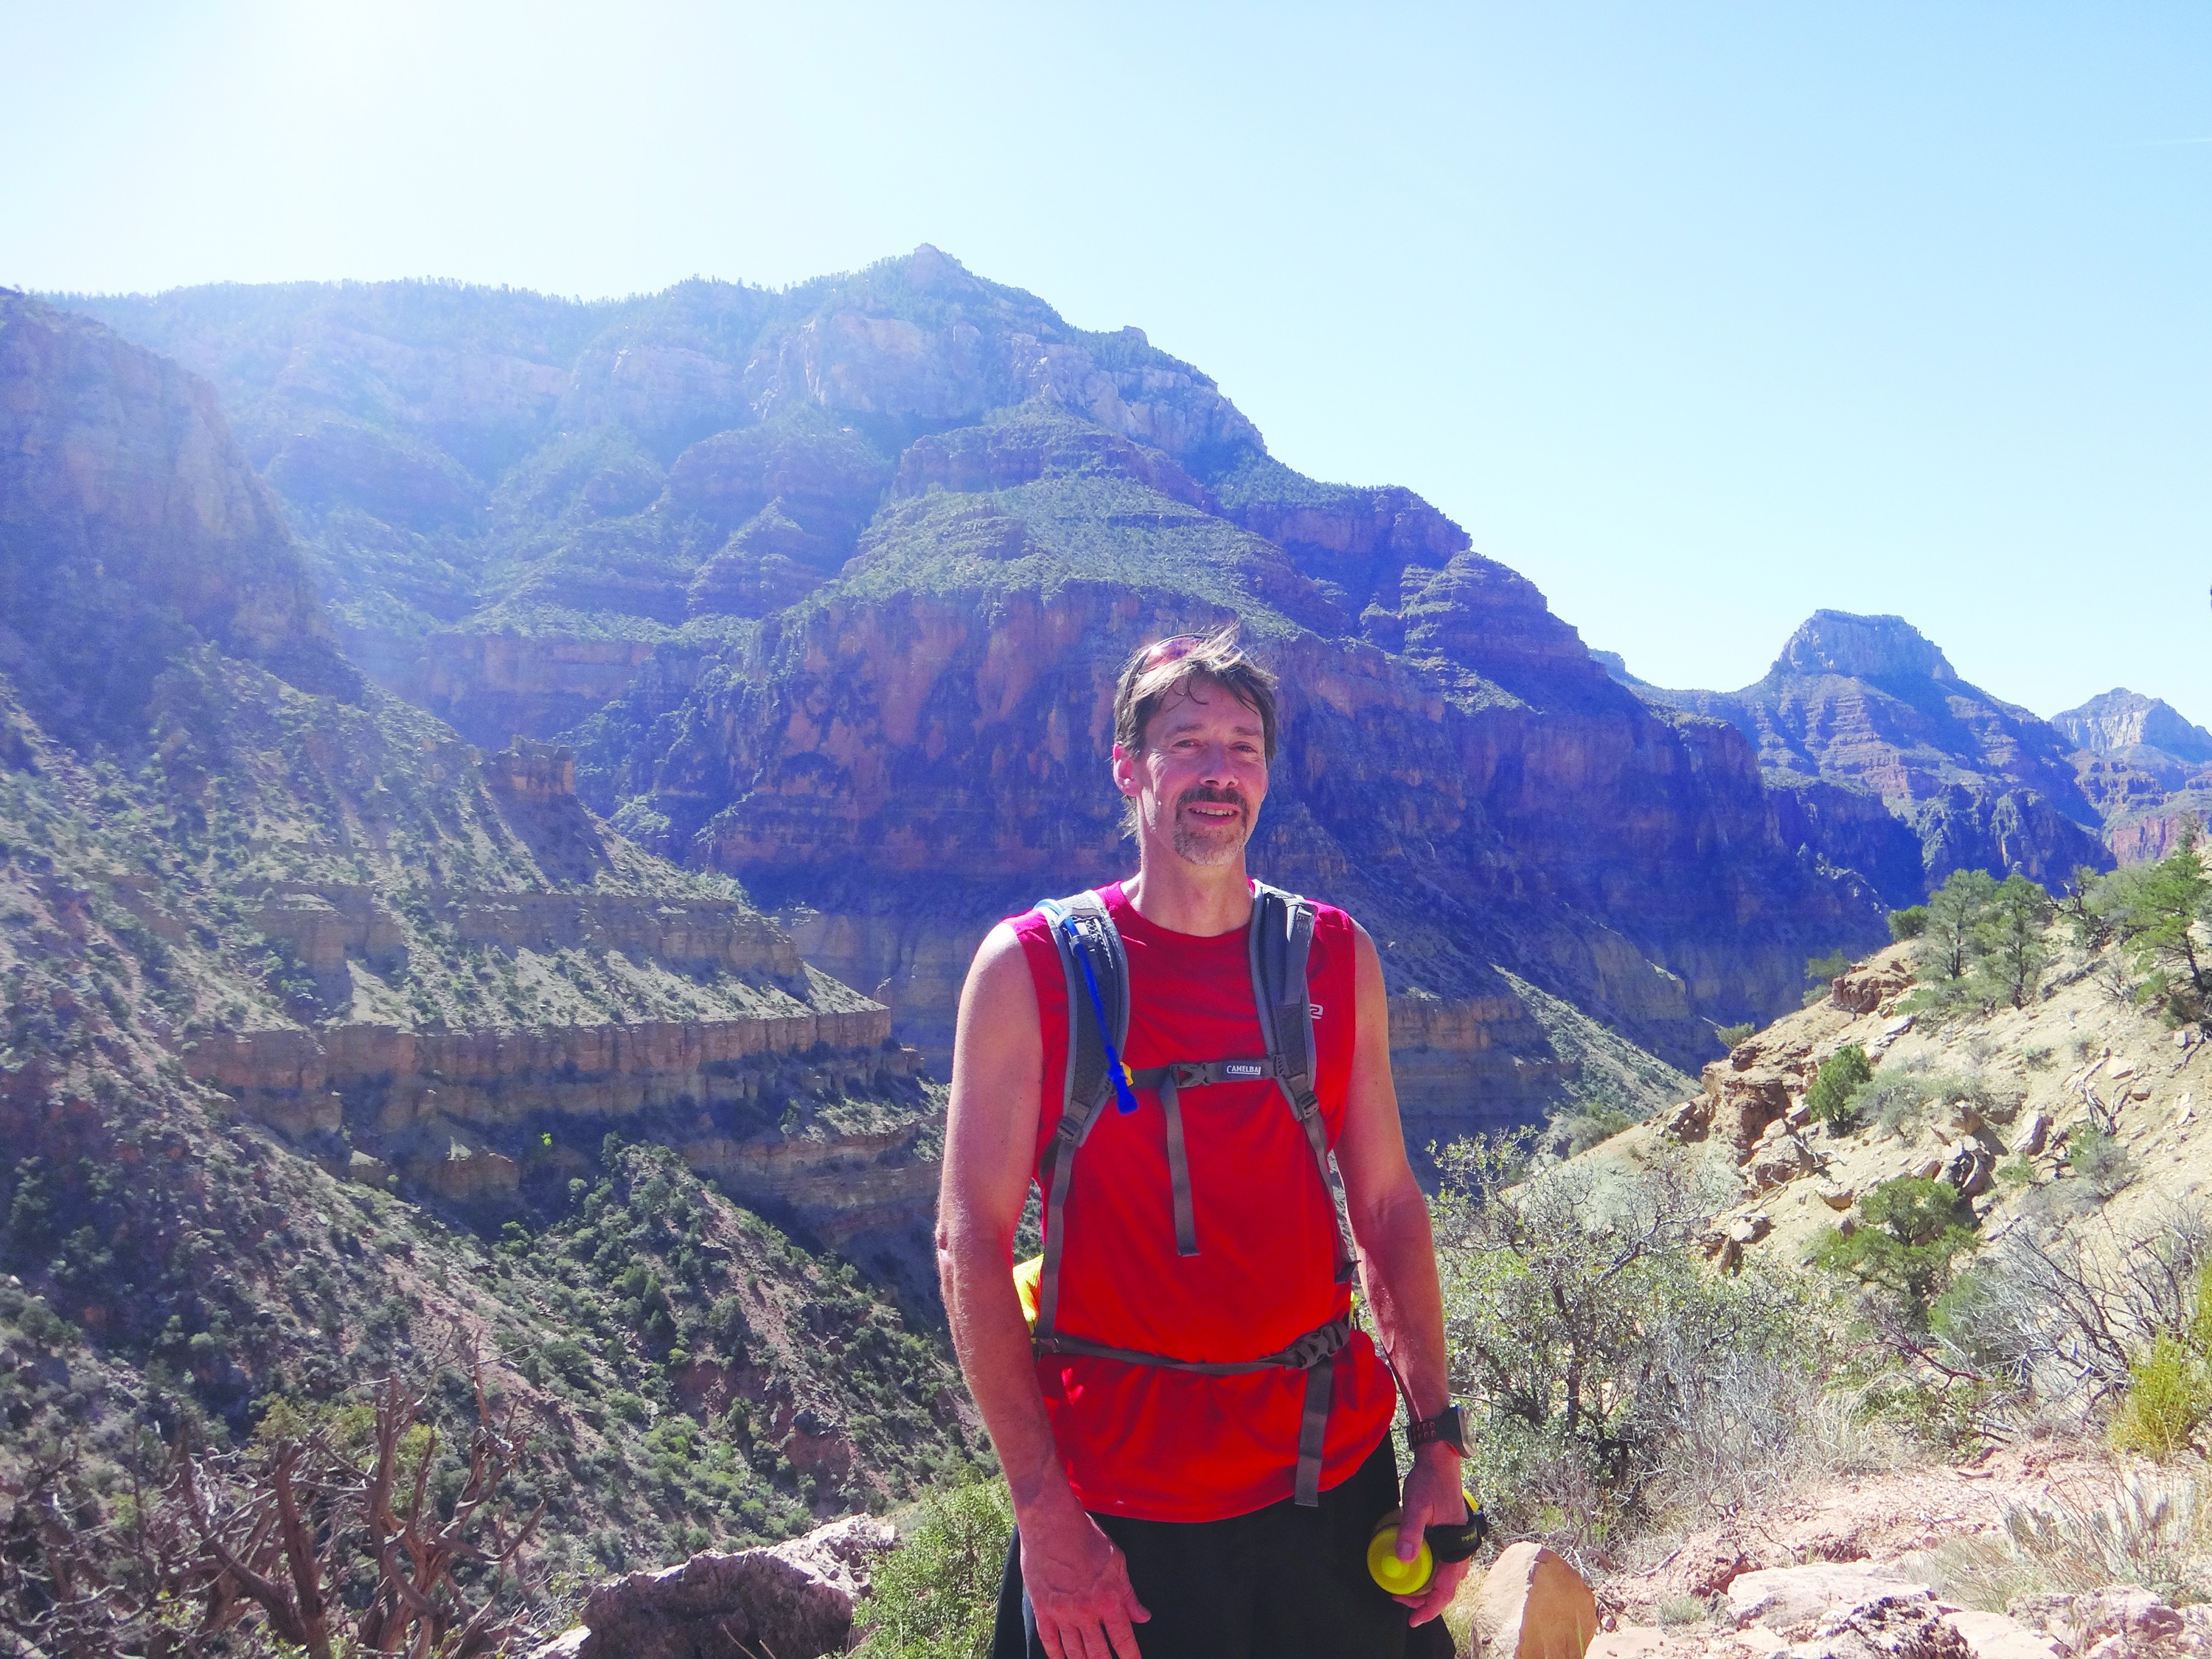 Dr. Karl Studtmann, an ear, nose and throat specialist, ran 42 miles across the Grand Canyon, from the north to the south rim and back again.